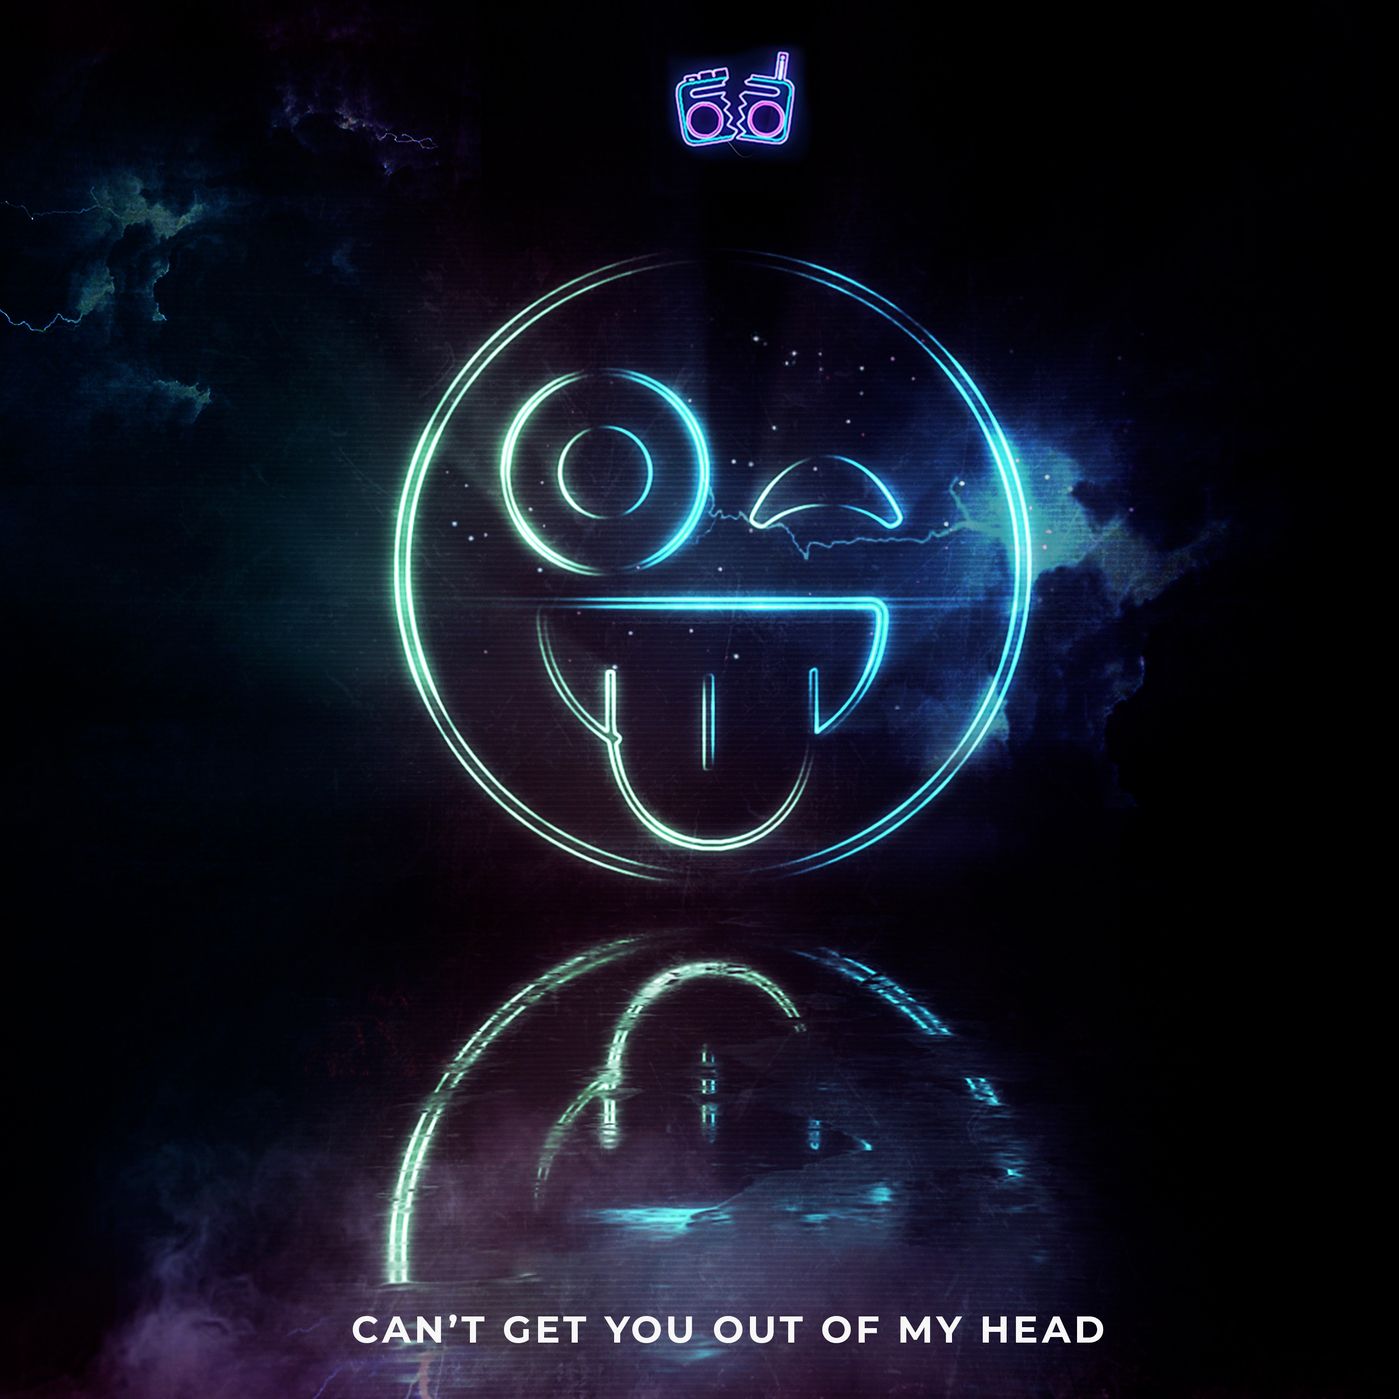 Budata Krayvent & Renzo Monteleone - Can't Get You Out Of My Head (feat. Meg Birch)